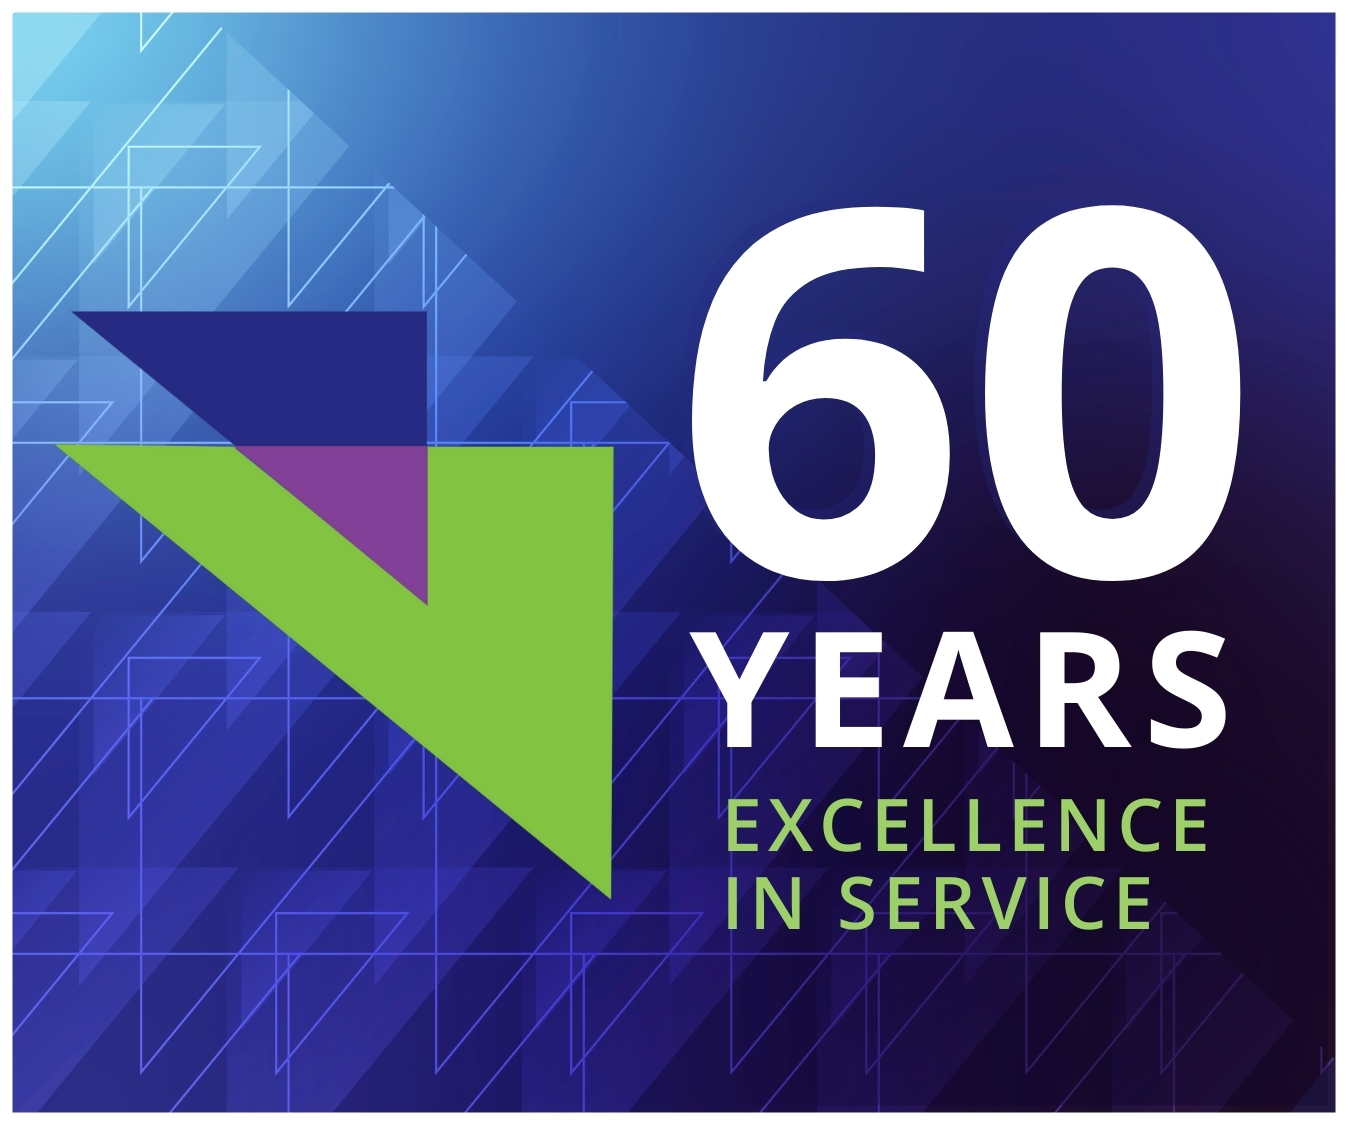 Blue, green, and white image showcasing the Continental logo, symbolizing their 60 years of excellence in service, specializing in financial solutions.